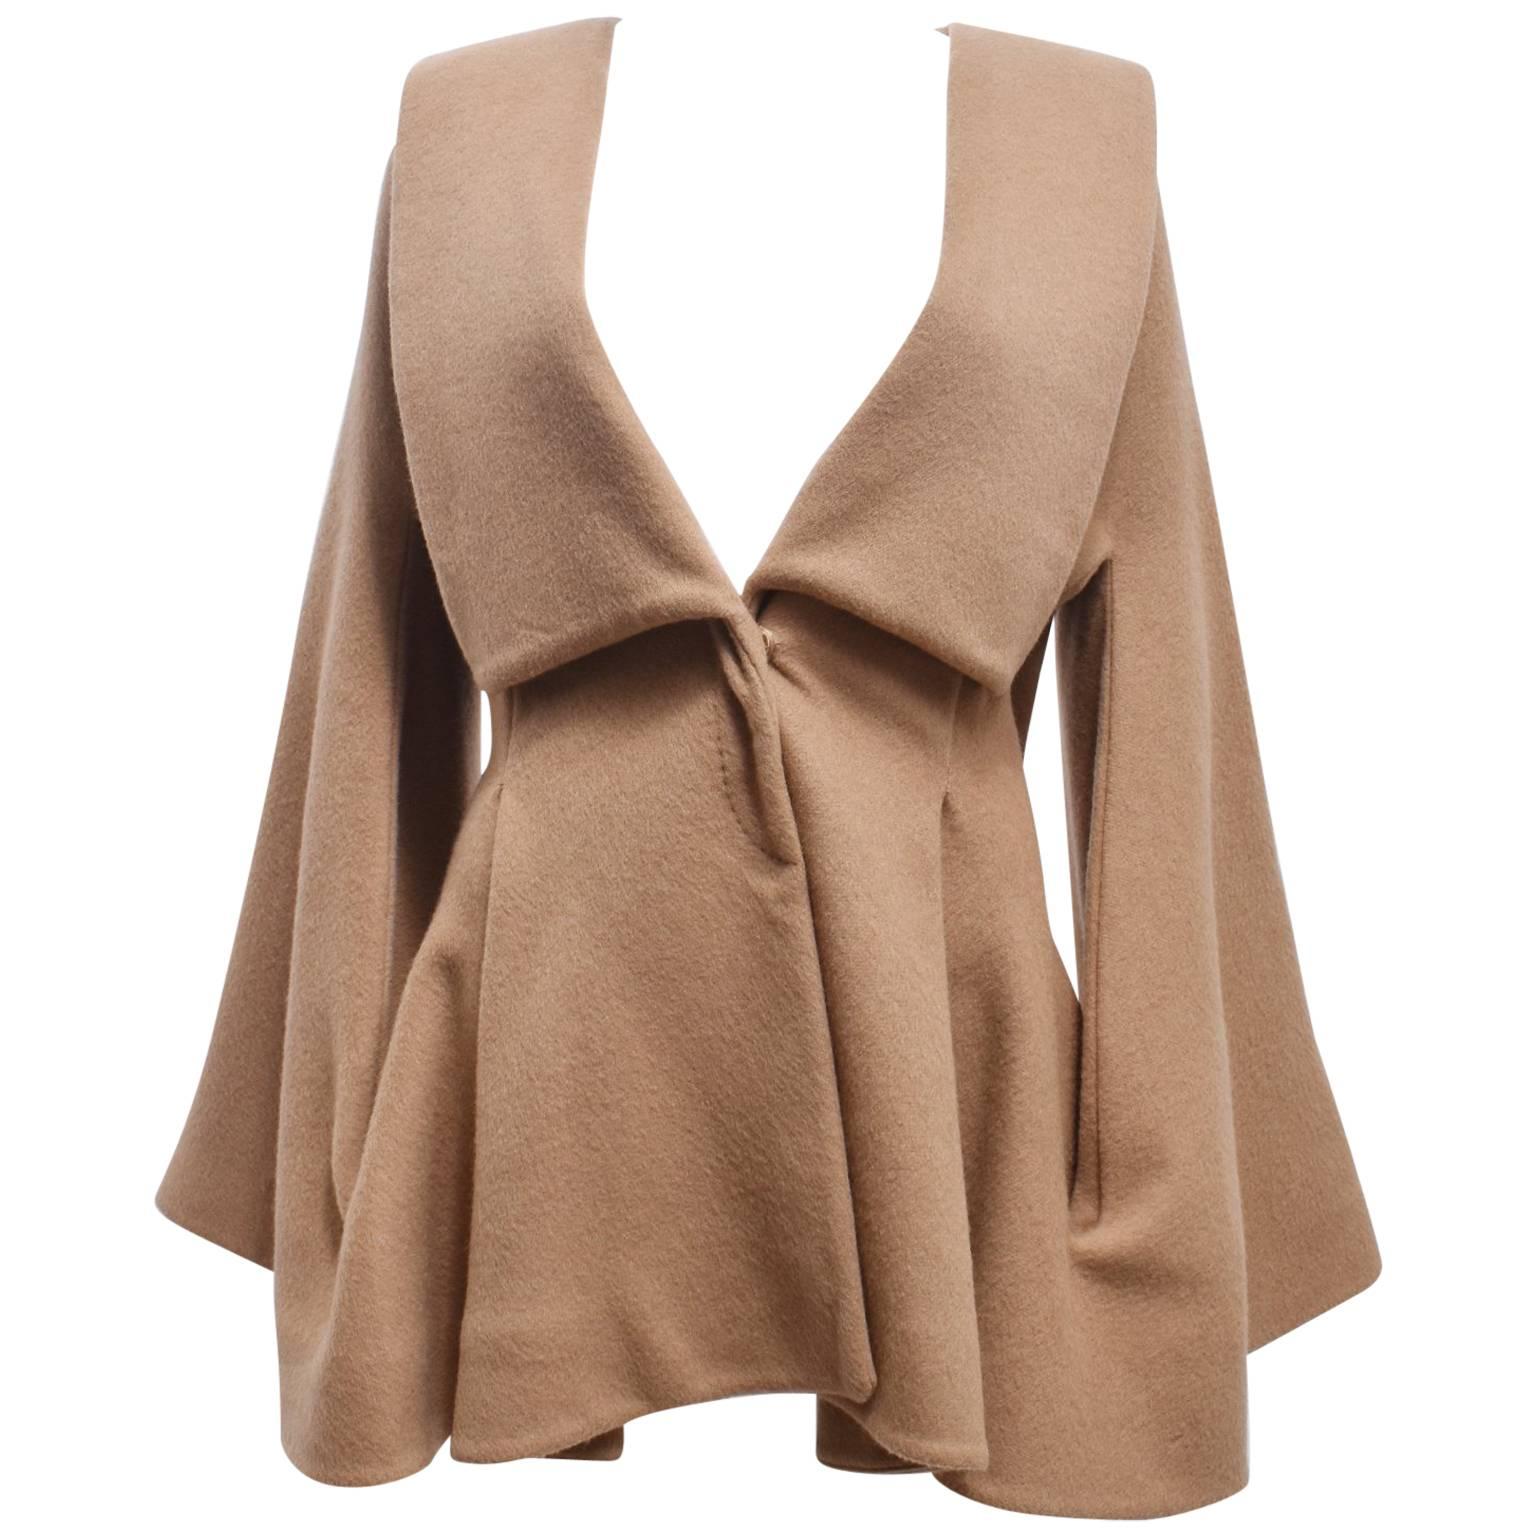 Alexander McQueen Camel Cashmere Coat with Connected Bell Sleeves